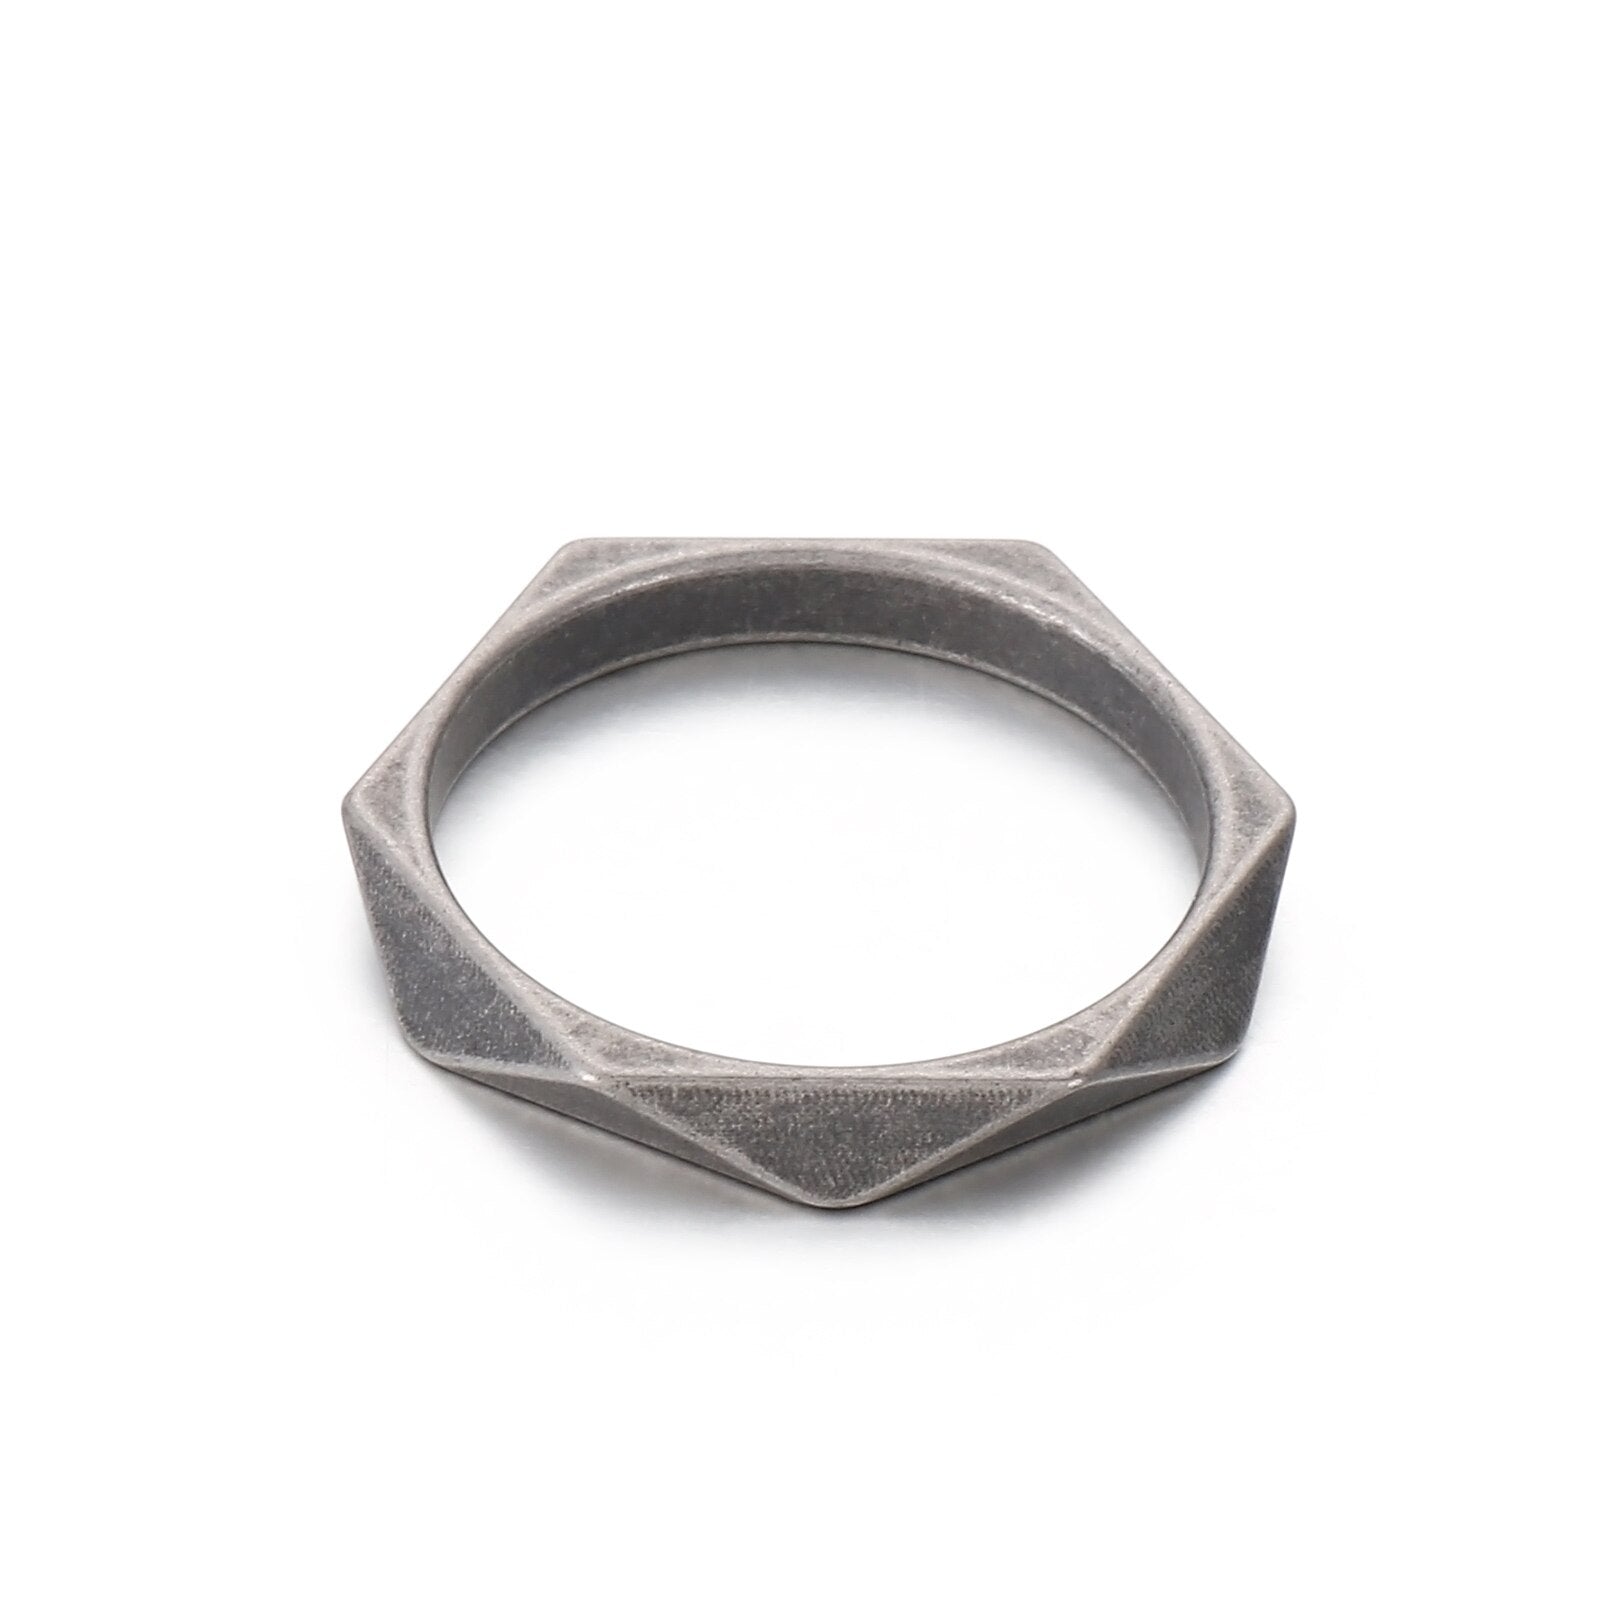 A Geo Cut Ring with a geometric design from Rebel Saint Co.